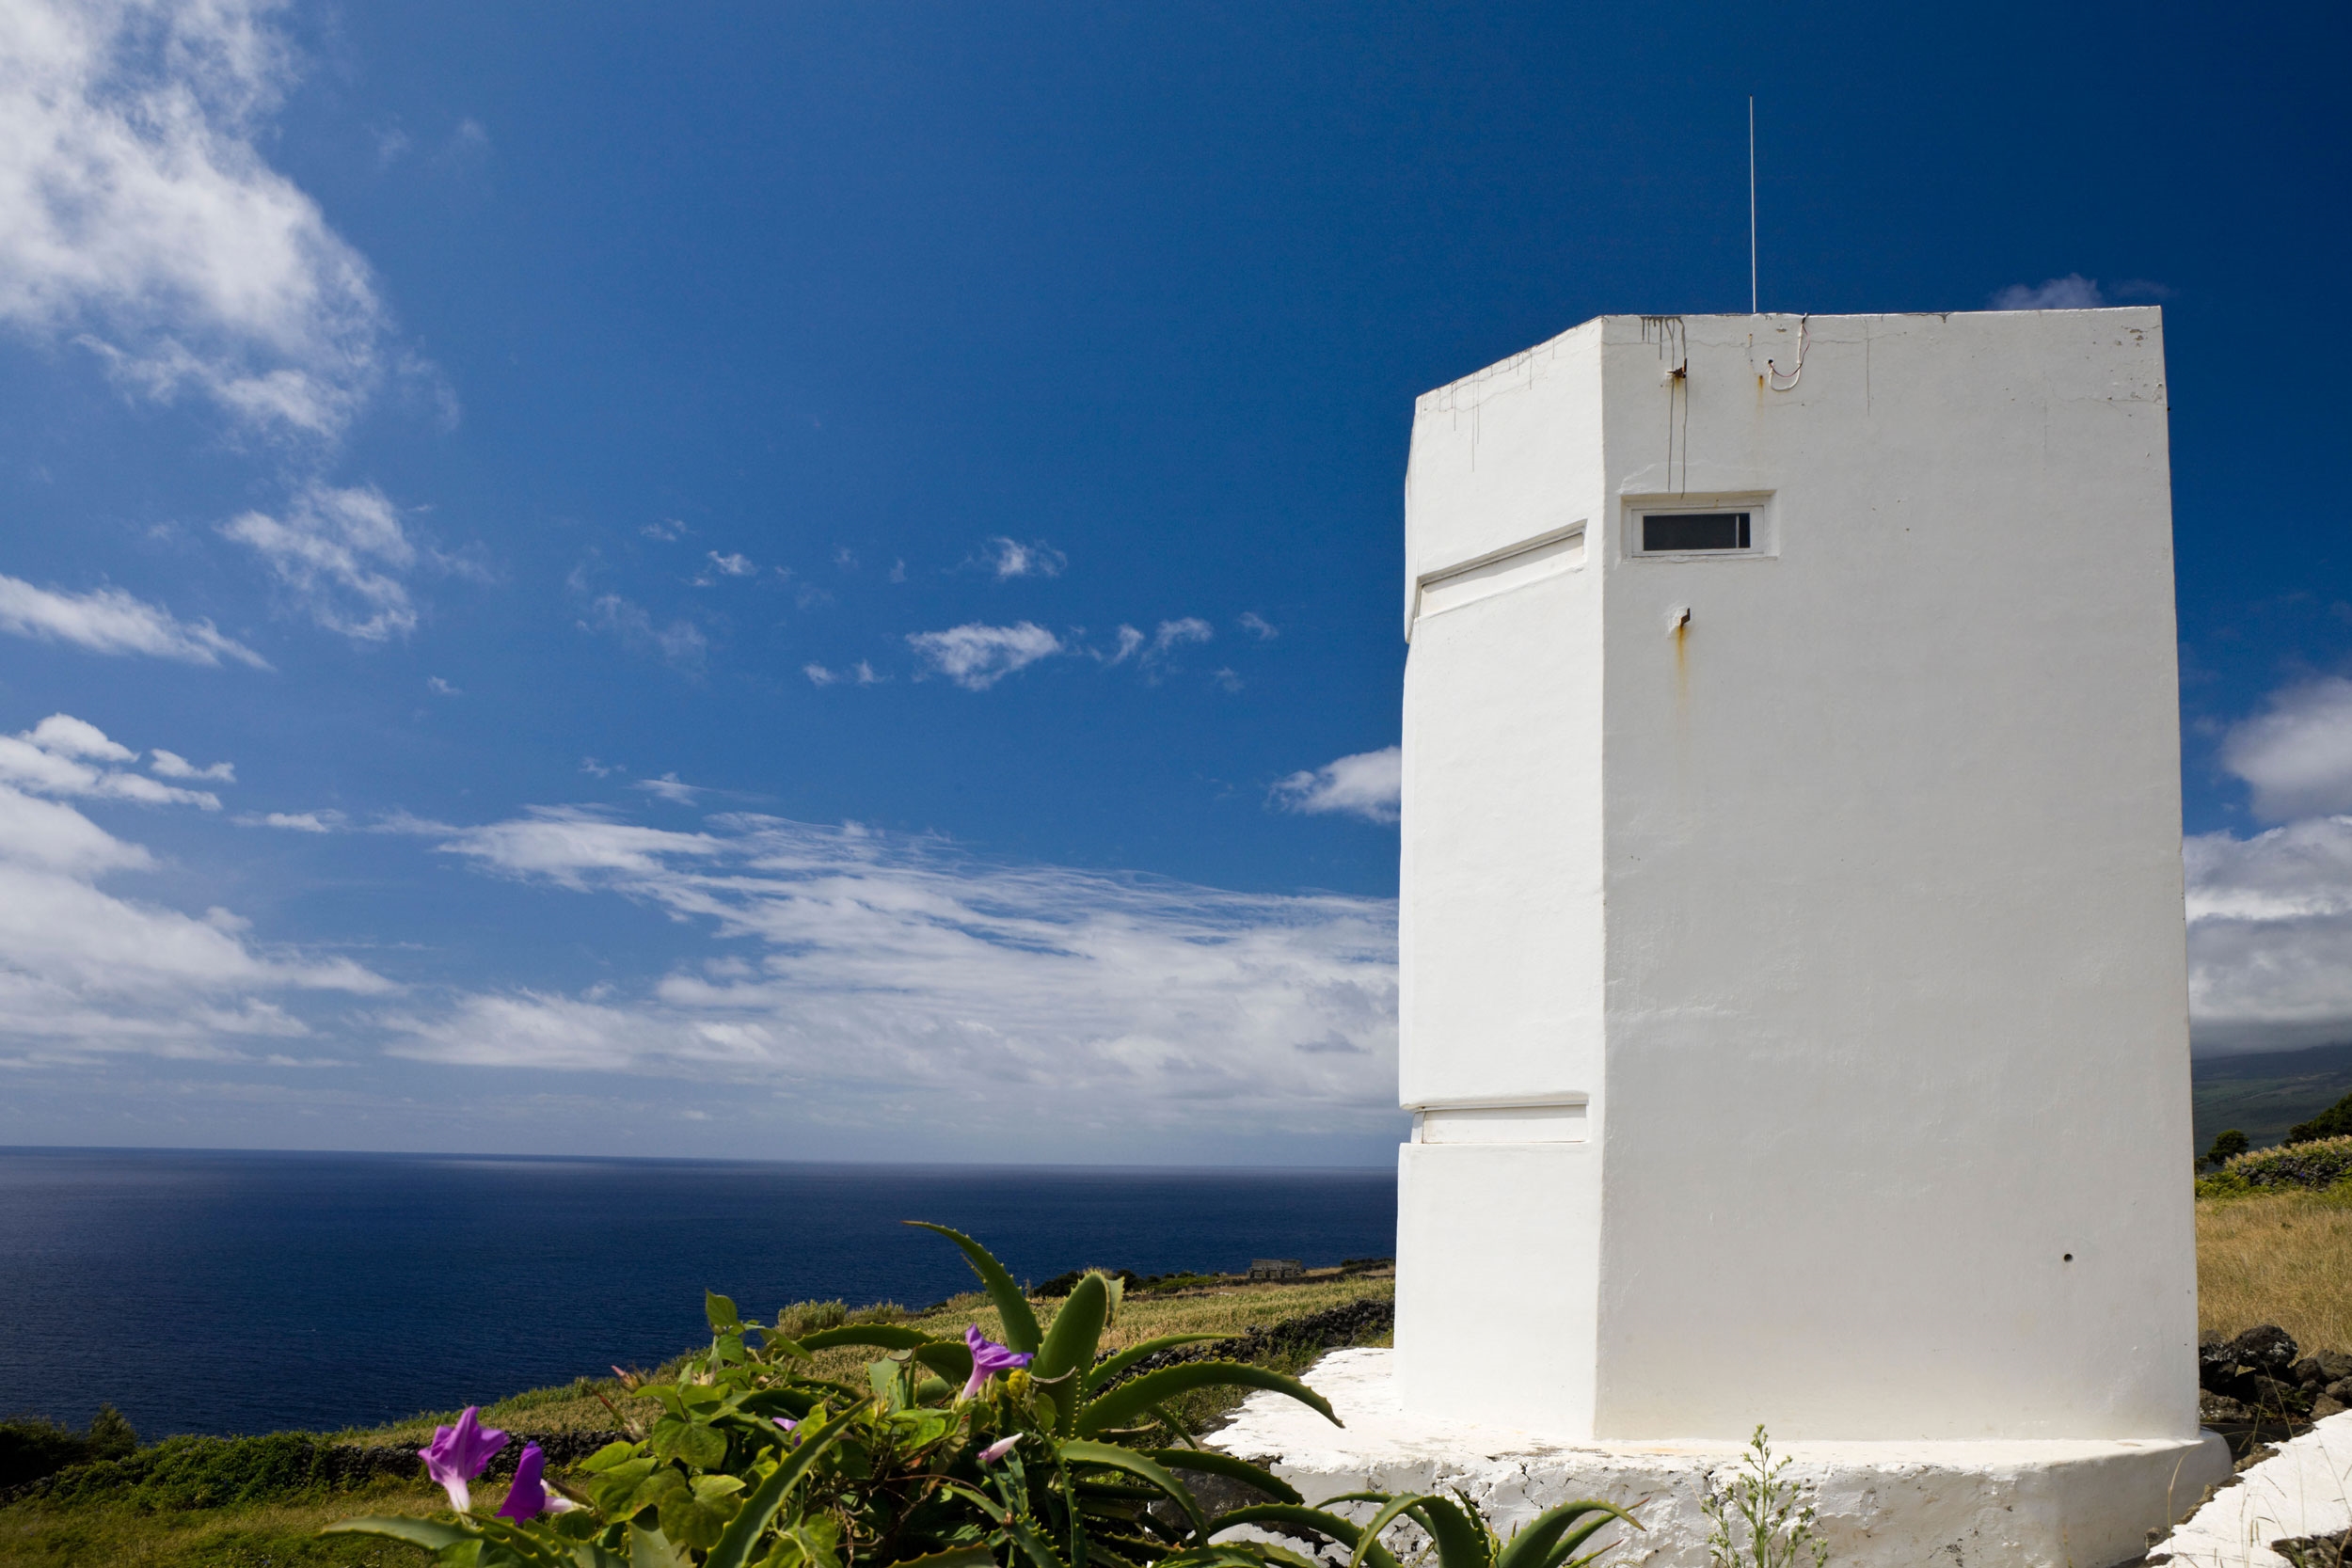 A white tower rises out of the grass into the sky, sort of looking like a cross between a lighthouse and a military building. It is relatively close to shore.